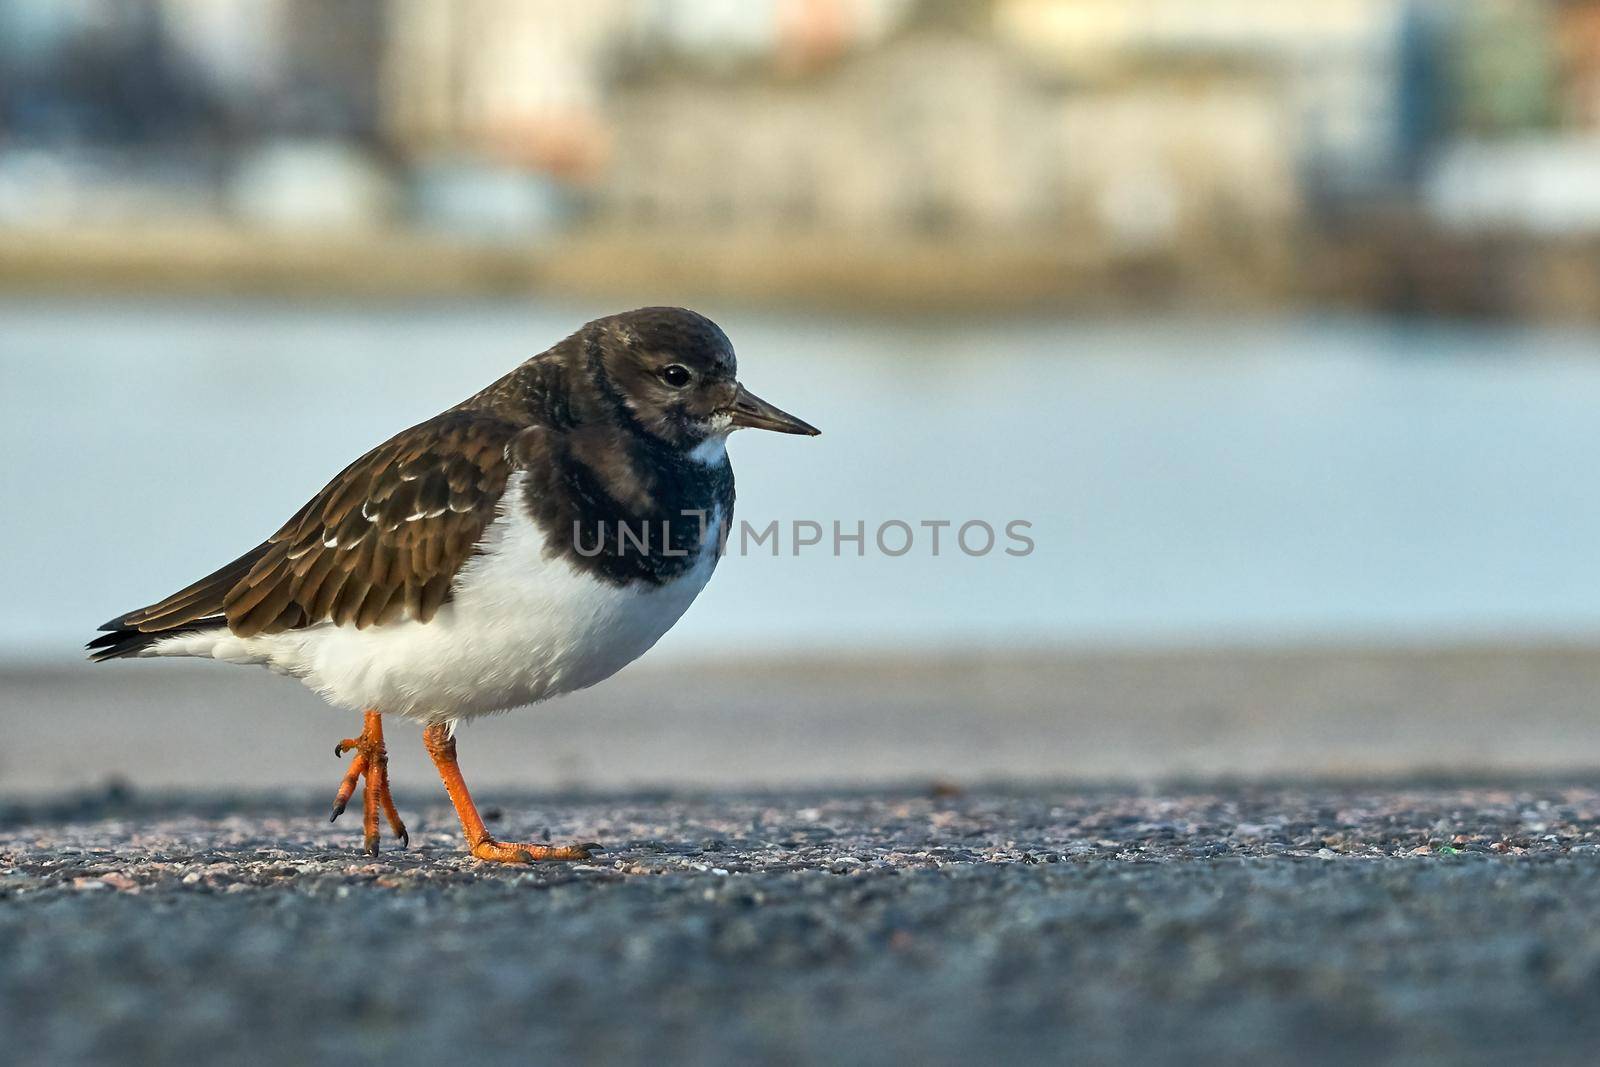 A turnstone with orange legs and white breast on a harbour arm